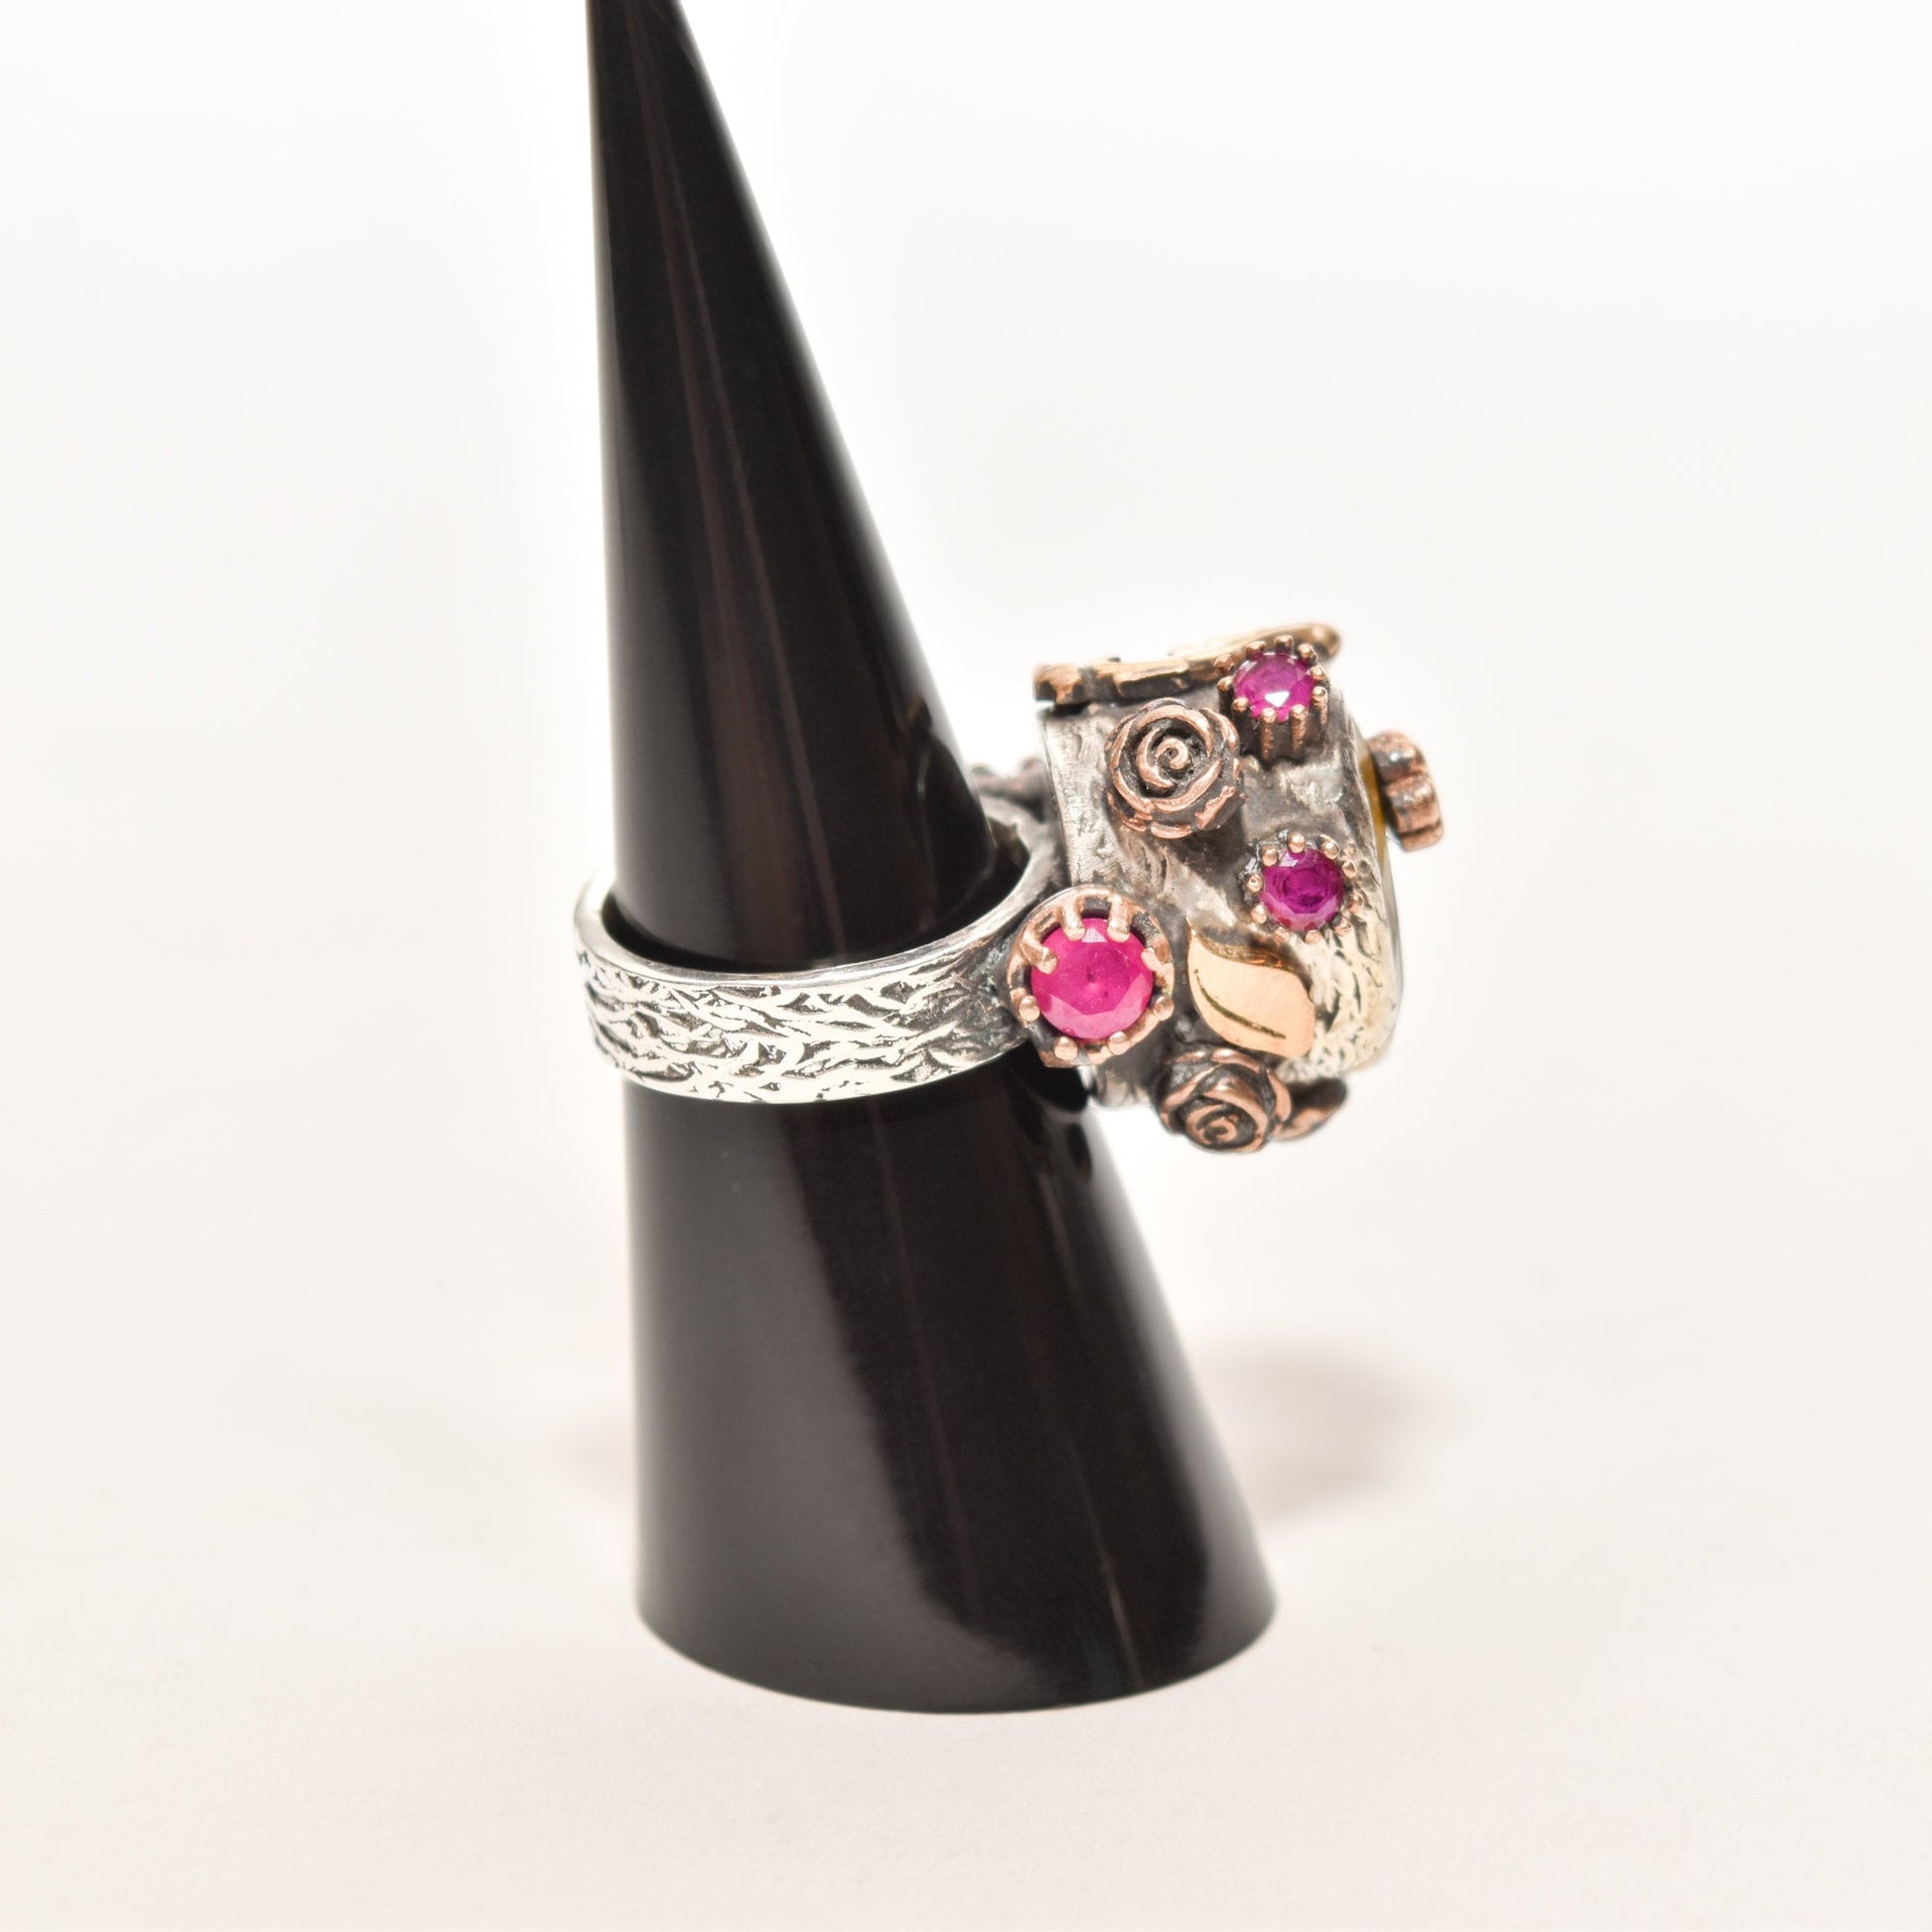 Brutalist Sterling Silver Citrine Ruby Flower Ring, Two-Tone Statement Ring Size 6.25 on Black Display Stand